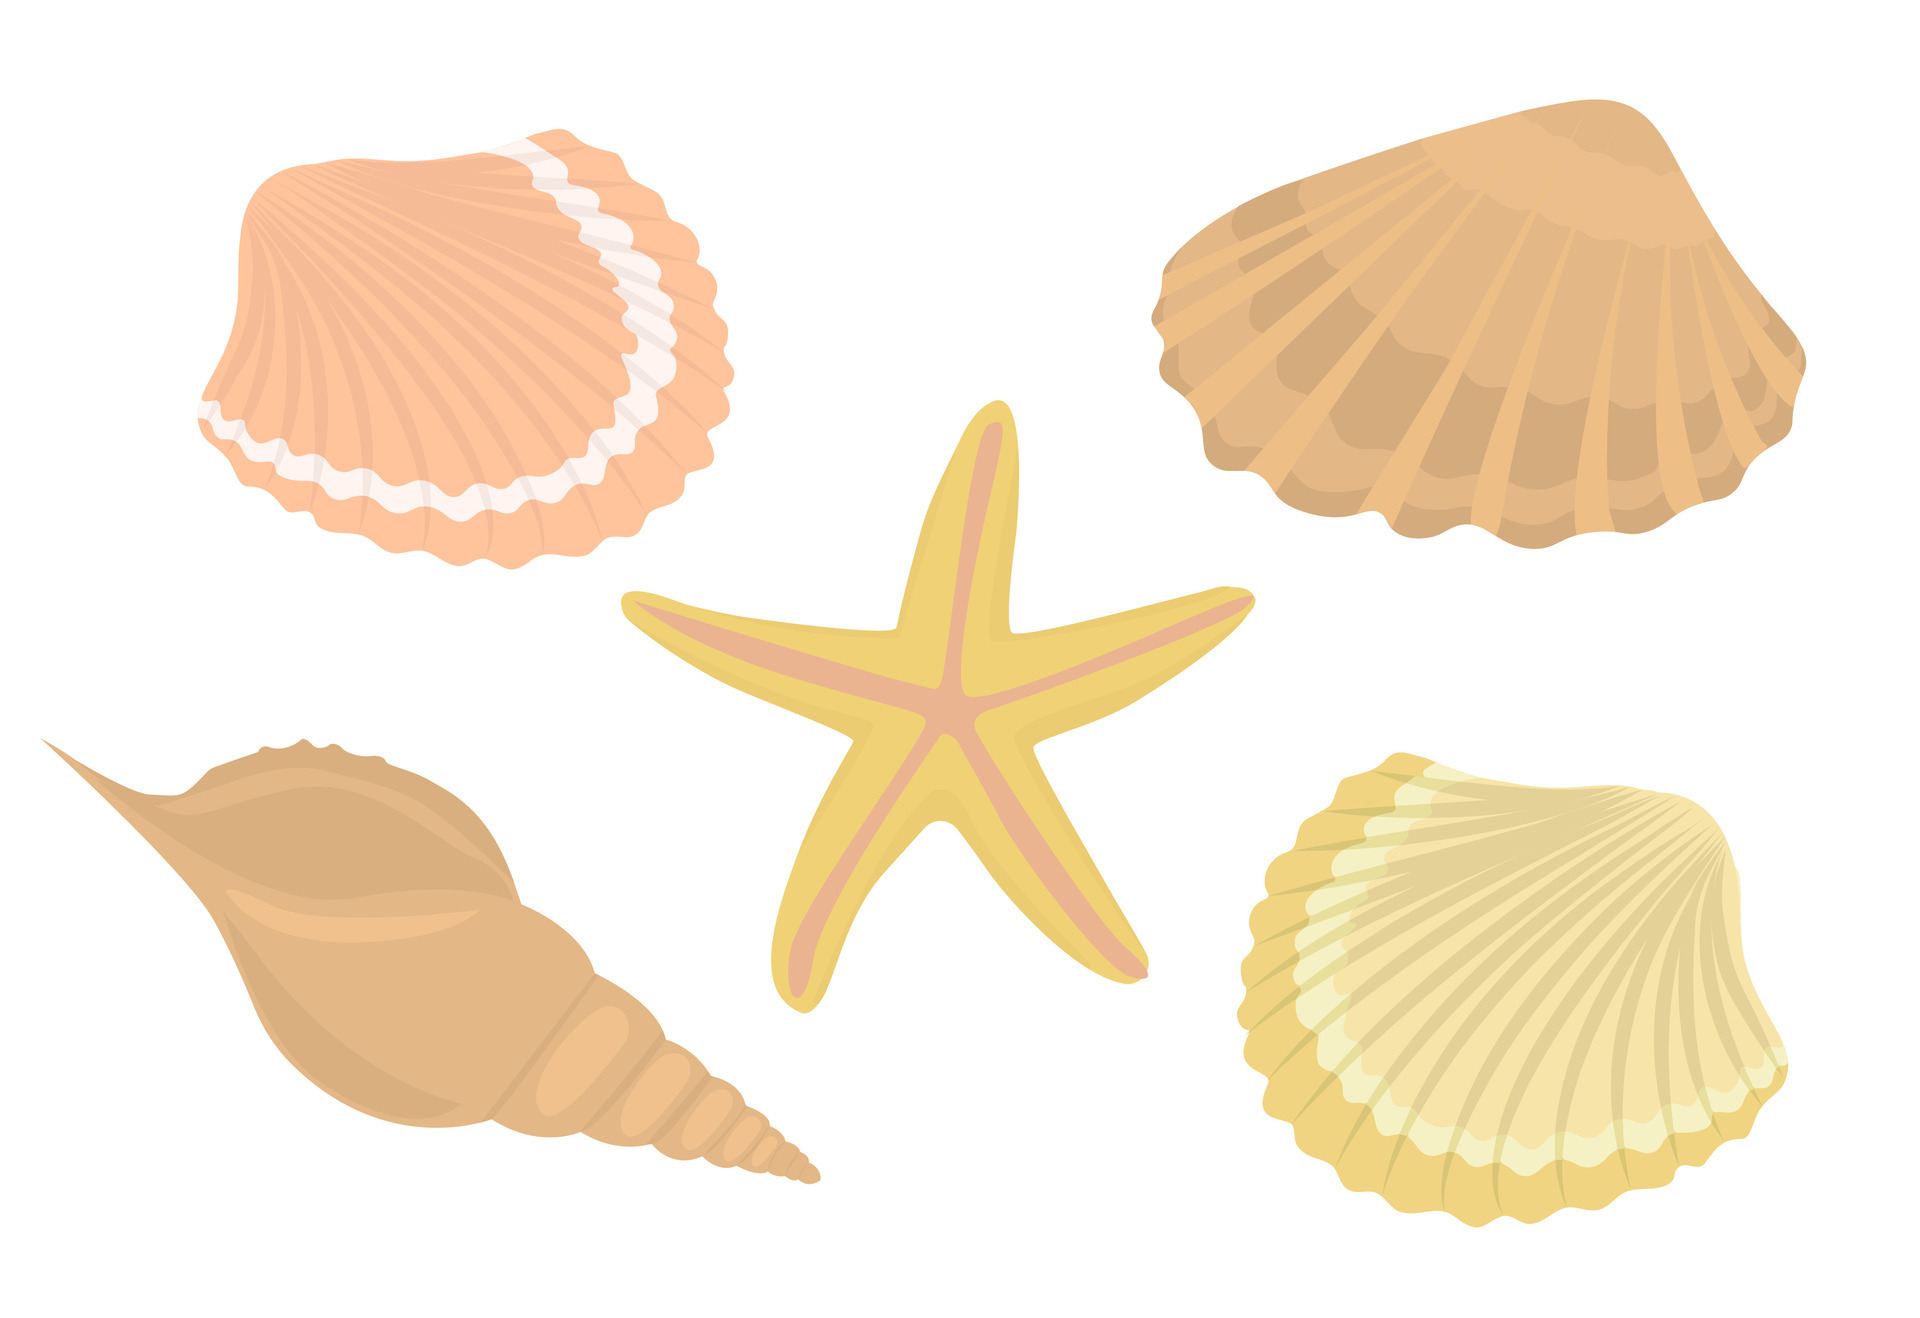 https://static.vecteezy.com/system/resources/previews/026/813/105/original/sea-shells-and-stars-collection-marine-illustration-of-ocean-shellfish-vector.jpg